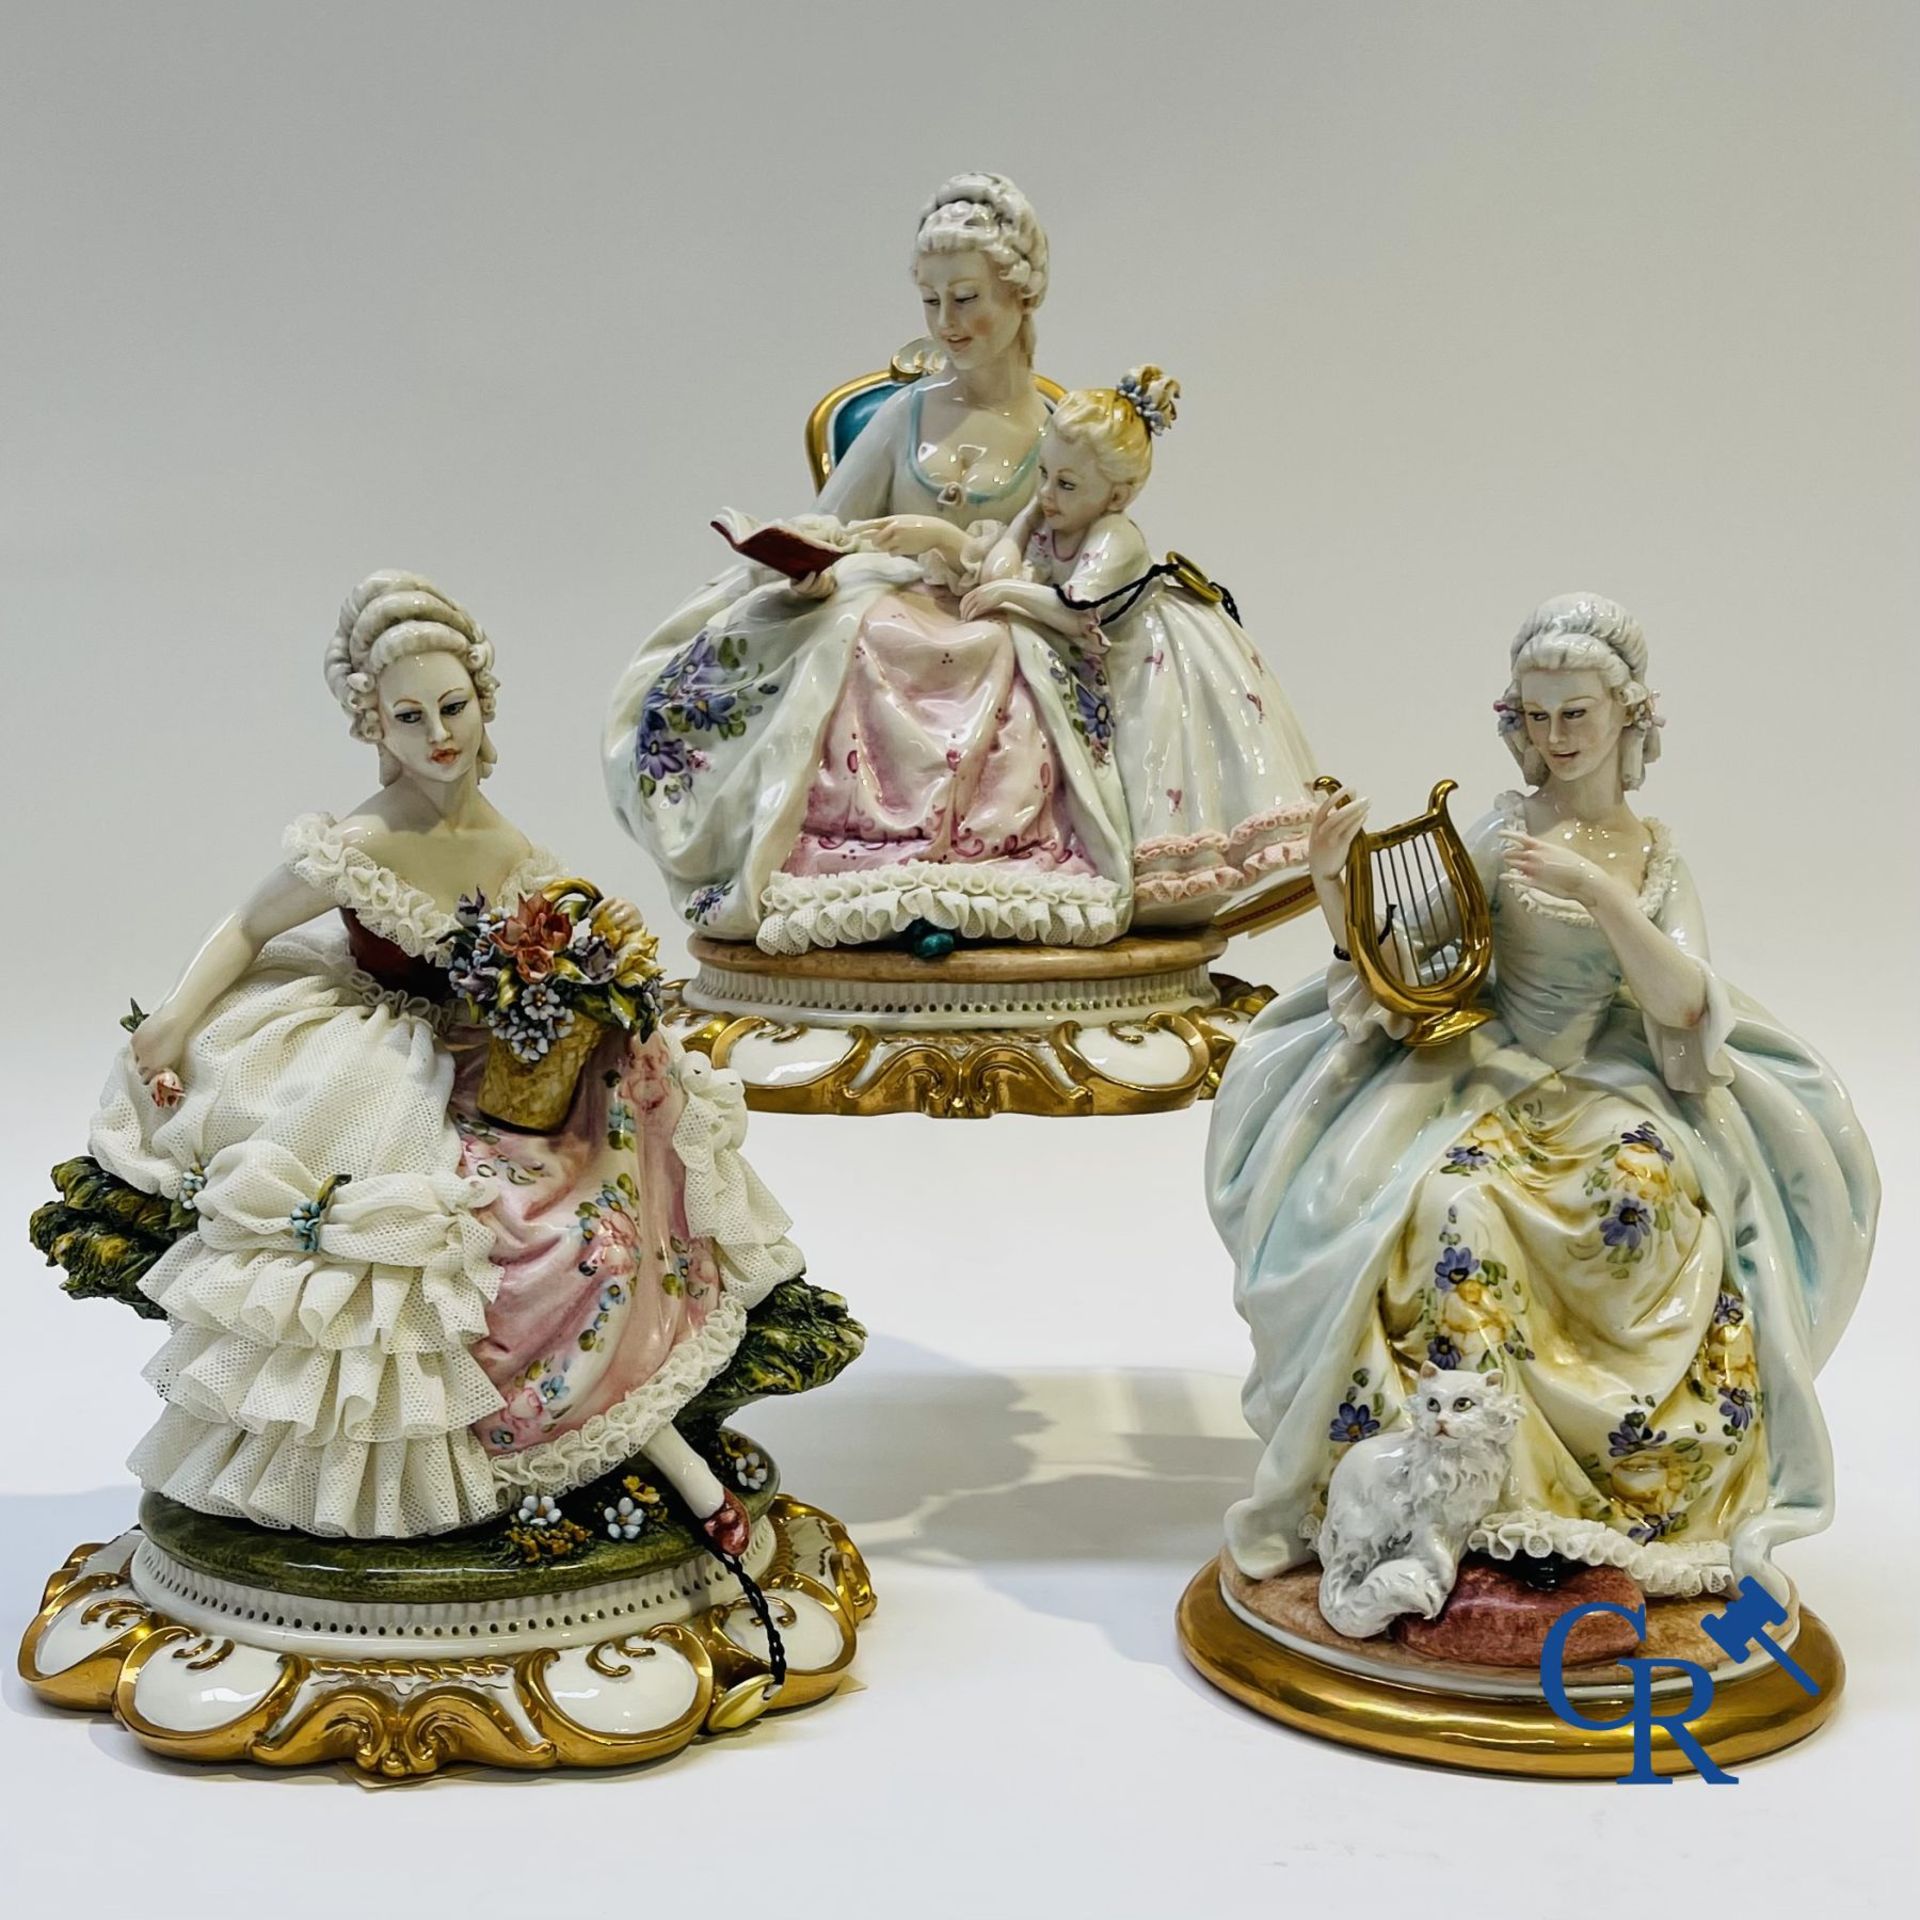 Porcelain: Capodimonte: 3 groups in Italian porcelain with lace.